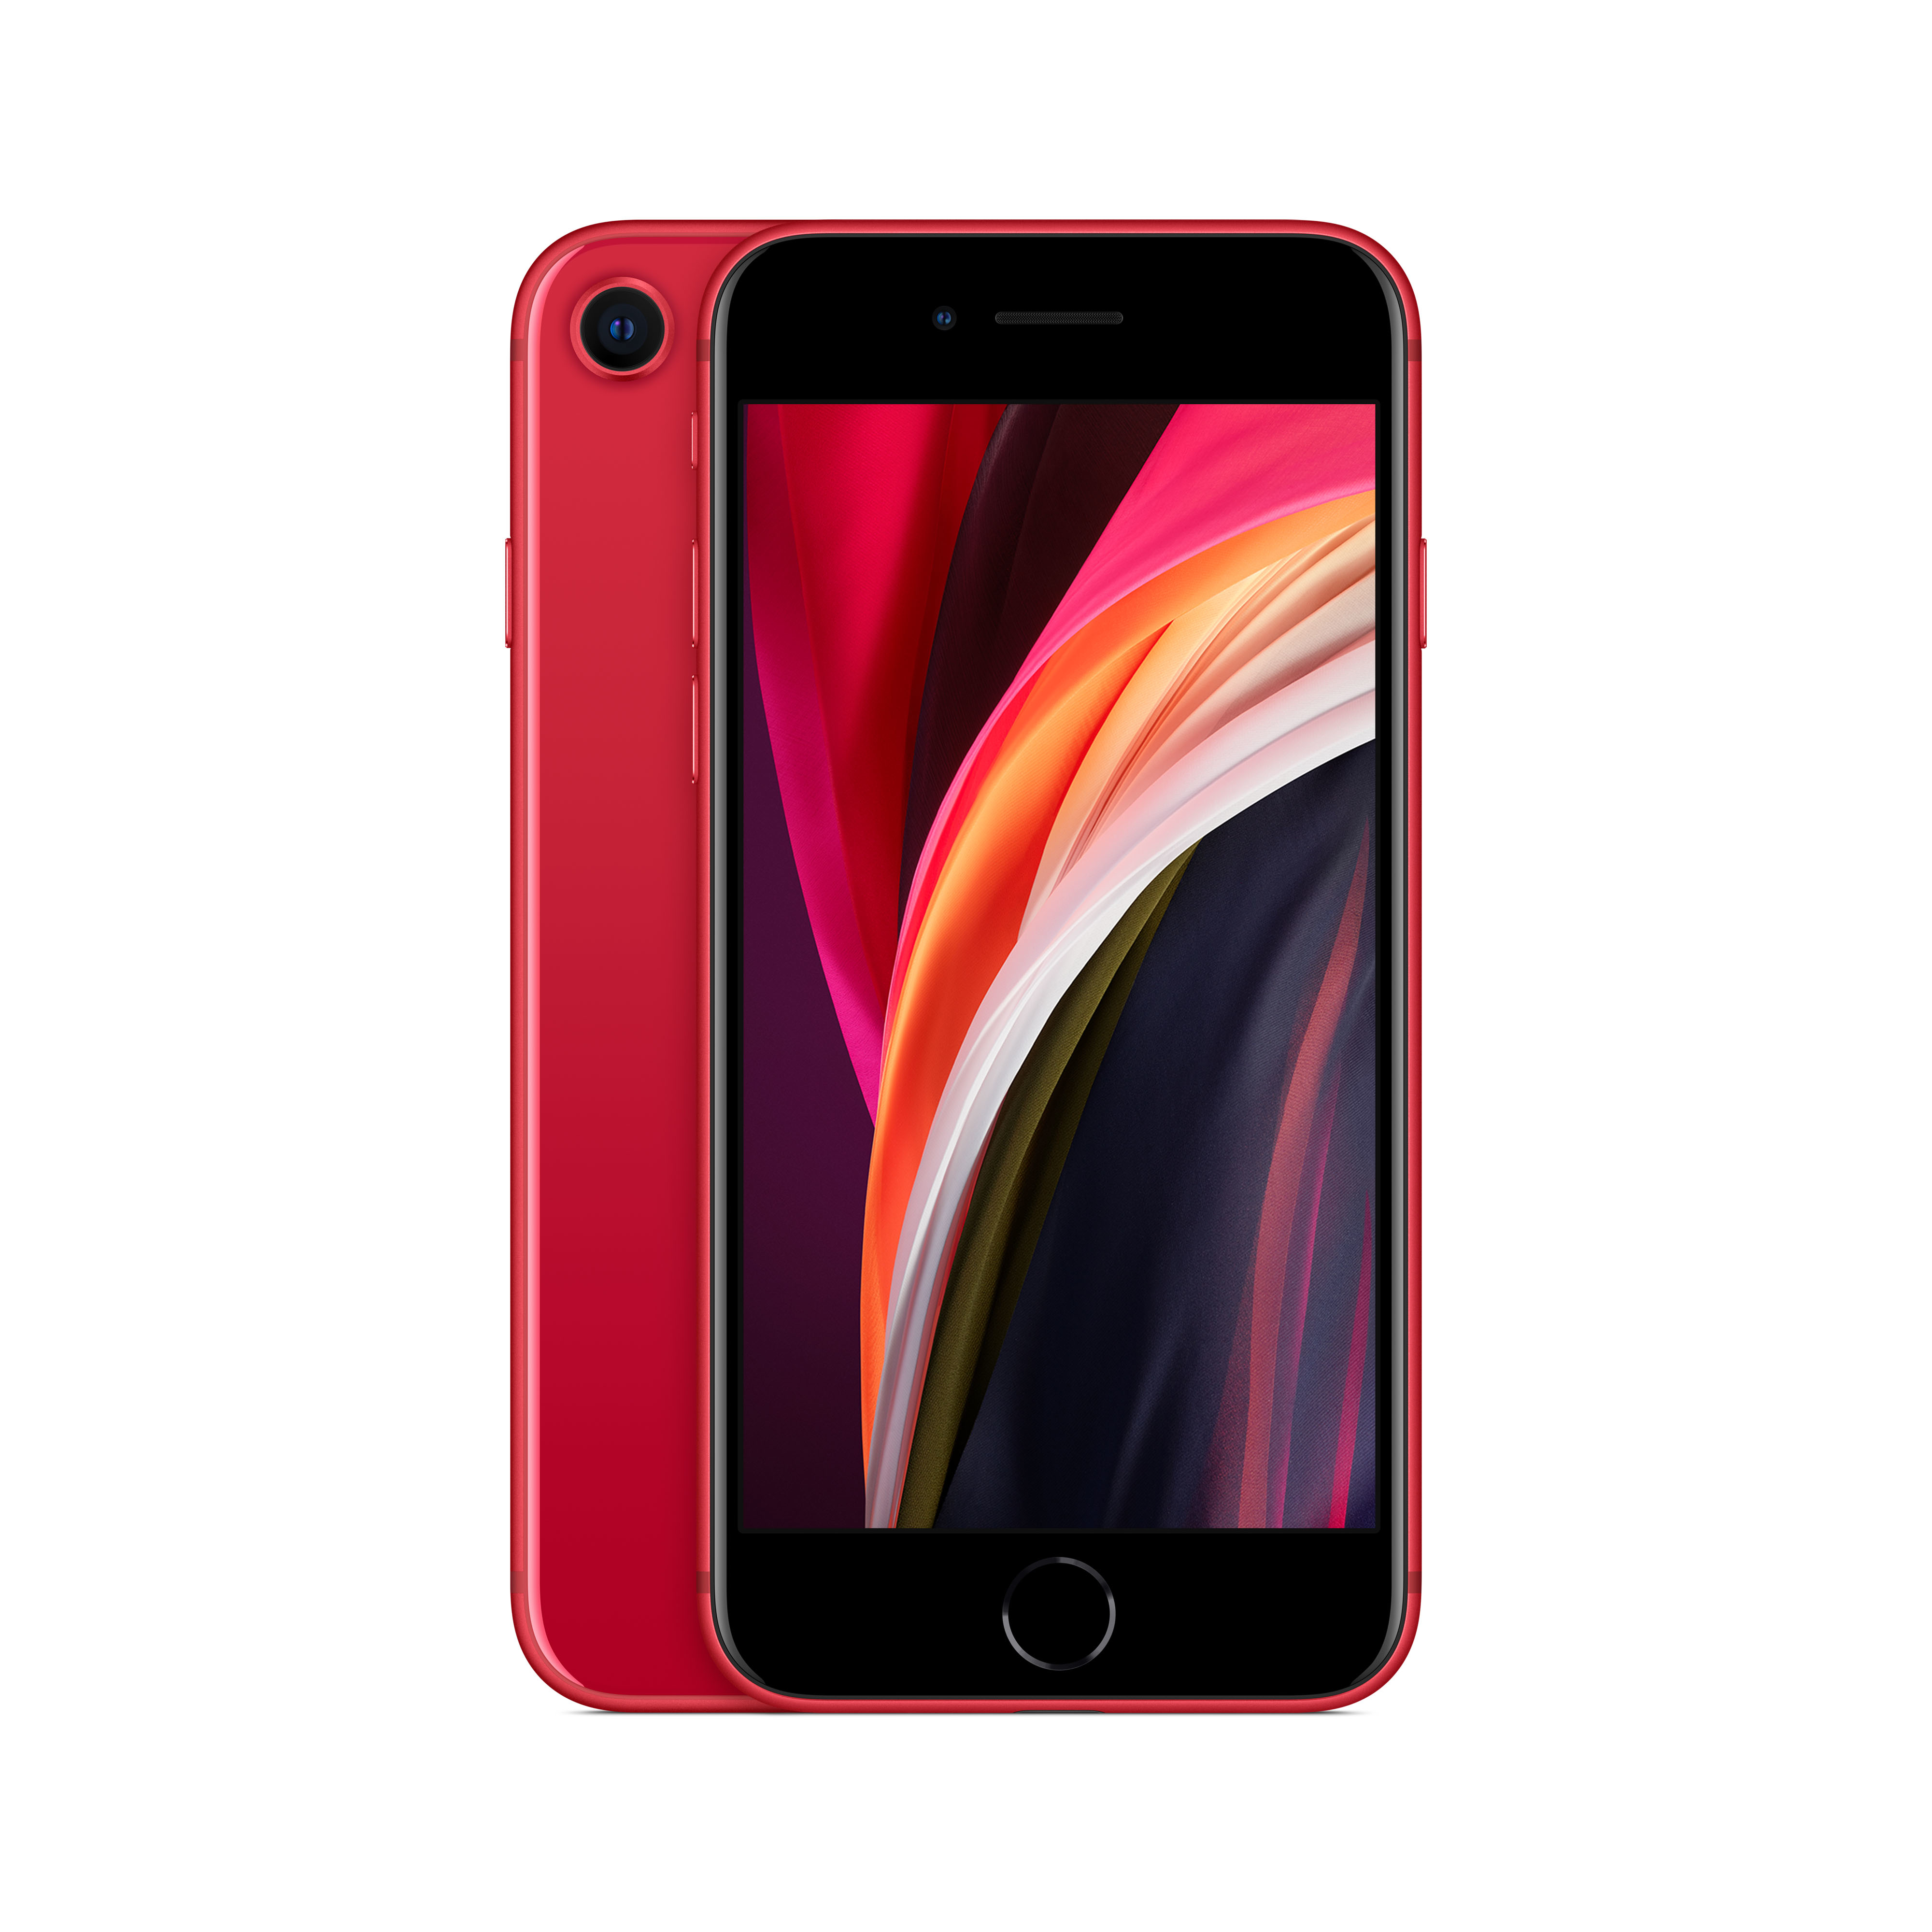 SMARTPHONE APPLE IPHONE SE 256GB (PRODUCT)RED